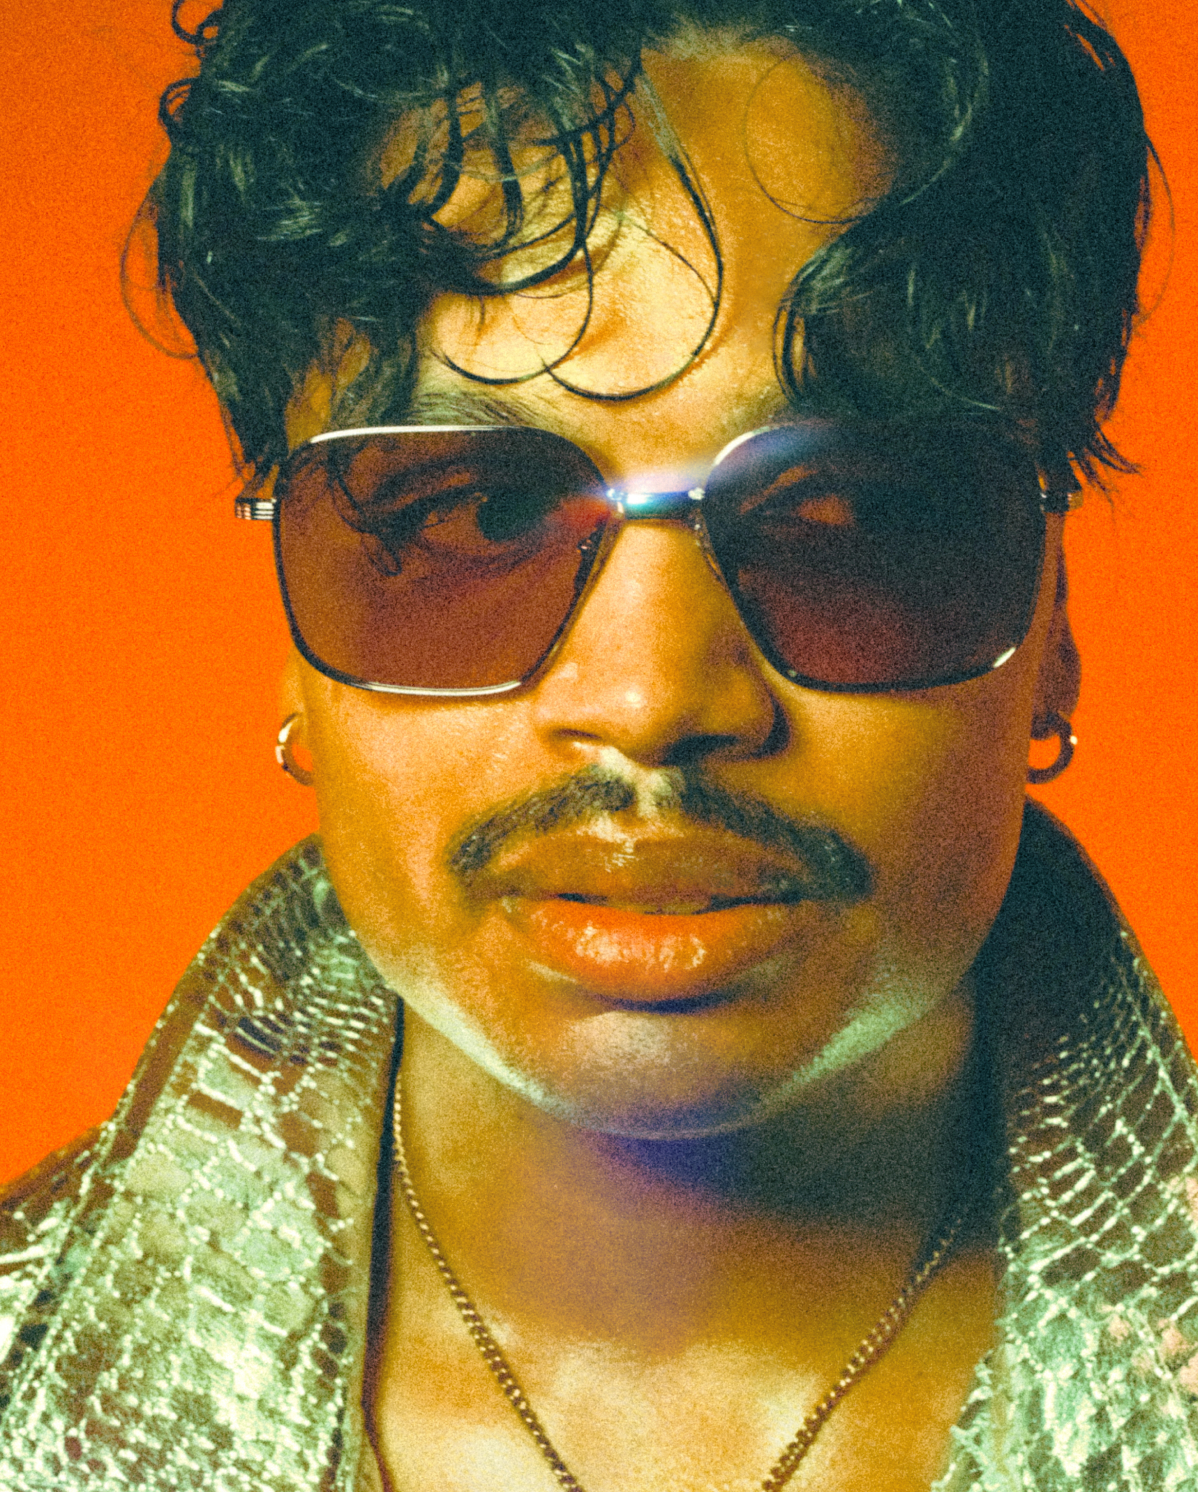 A person with curly hair and a mustache is wearing large sunglasses and a snakeskin-patterned jacket. They have a serious expression and are set against a bright red background.